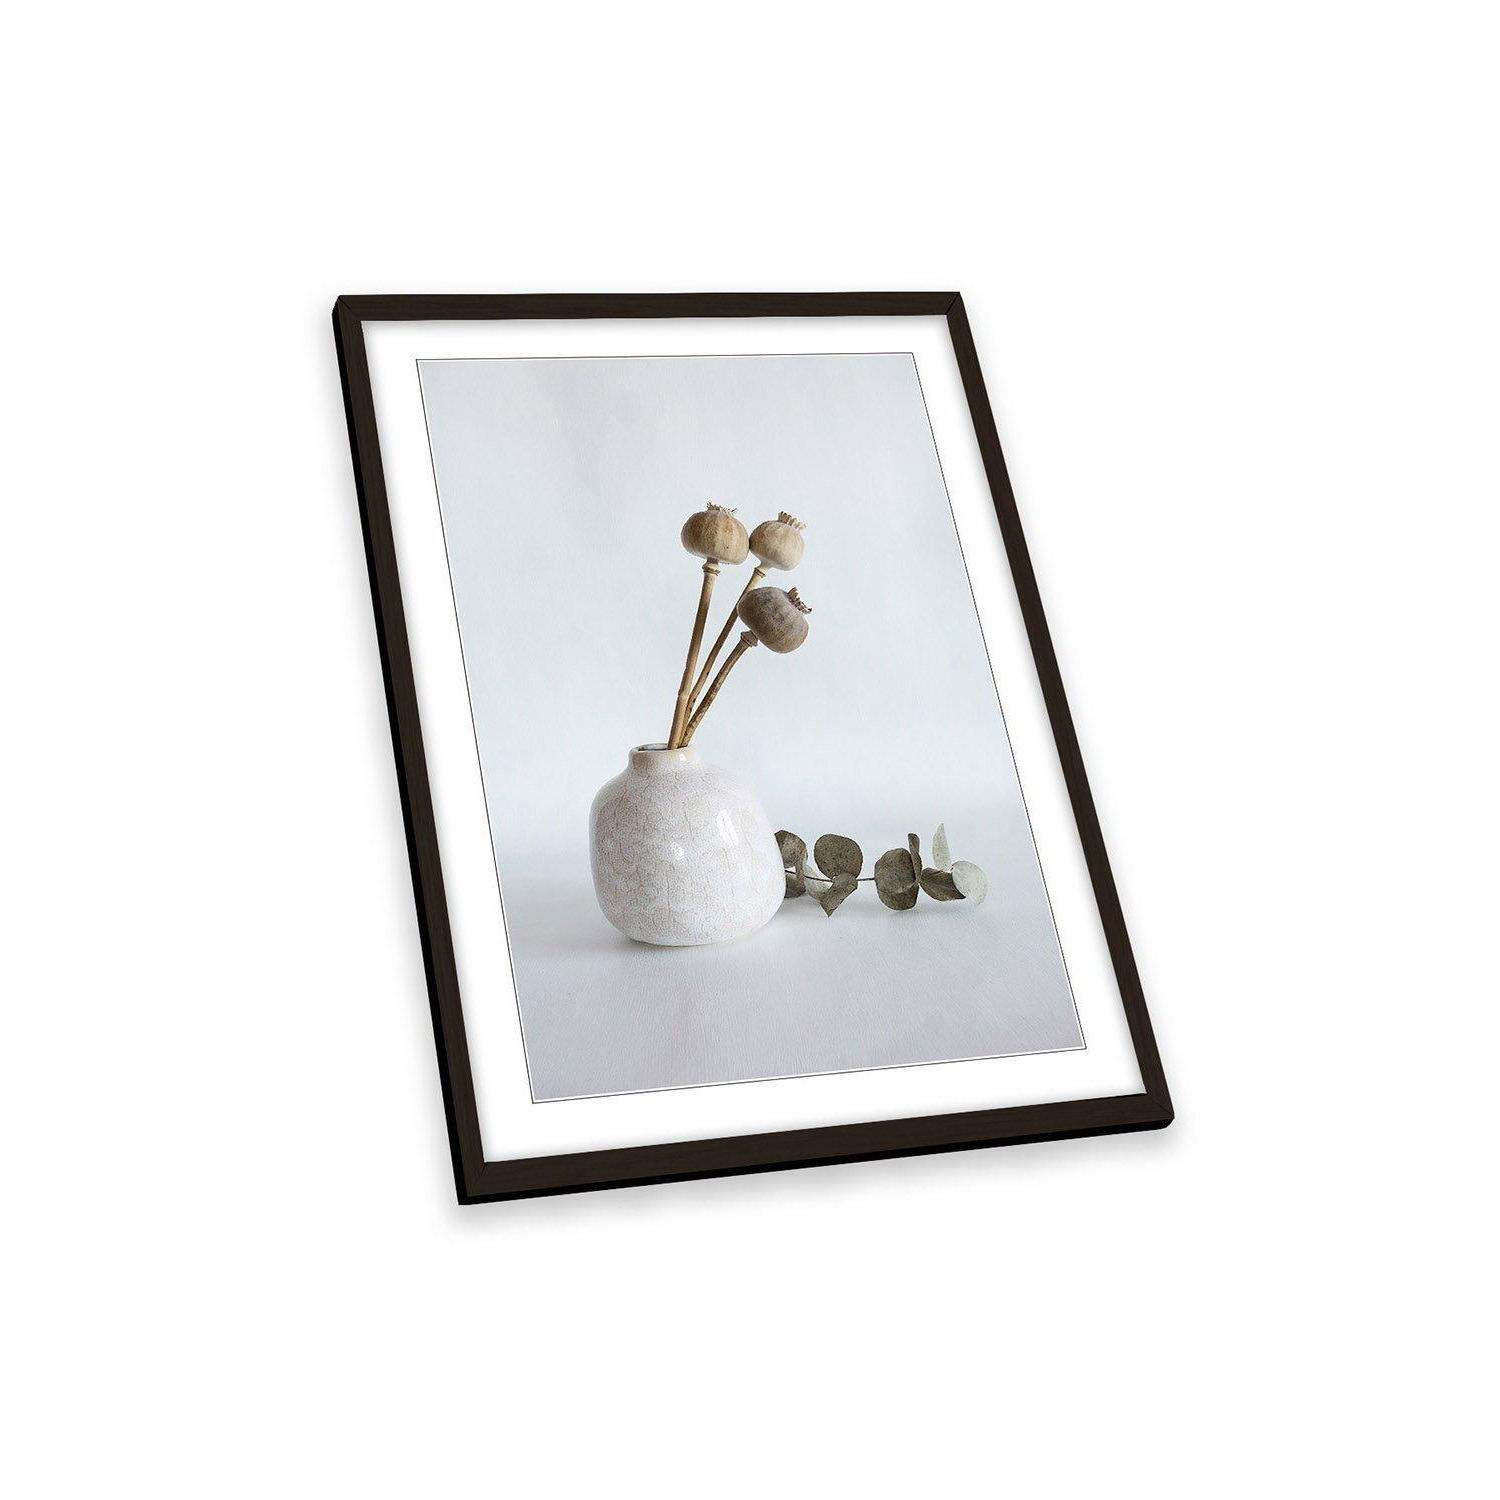 Light Touches Gently Flower Seeds Vase Framed Art Print Picture Wall Artwork - (W)64cm x (H)89cm - image 1